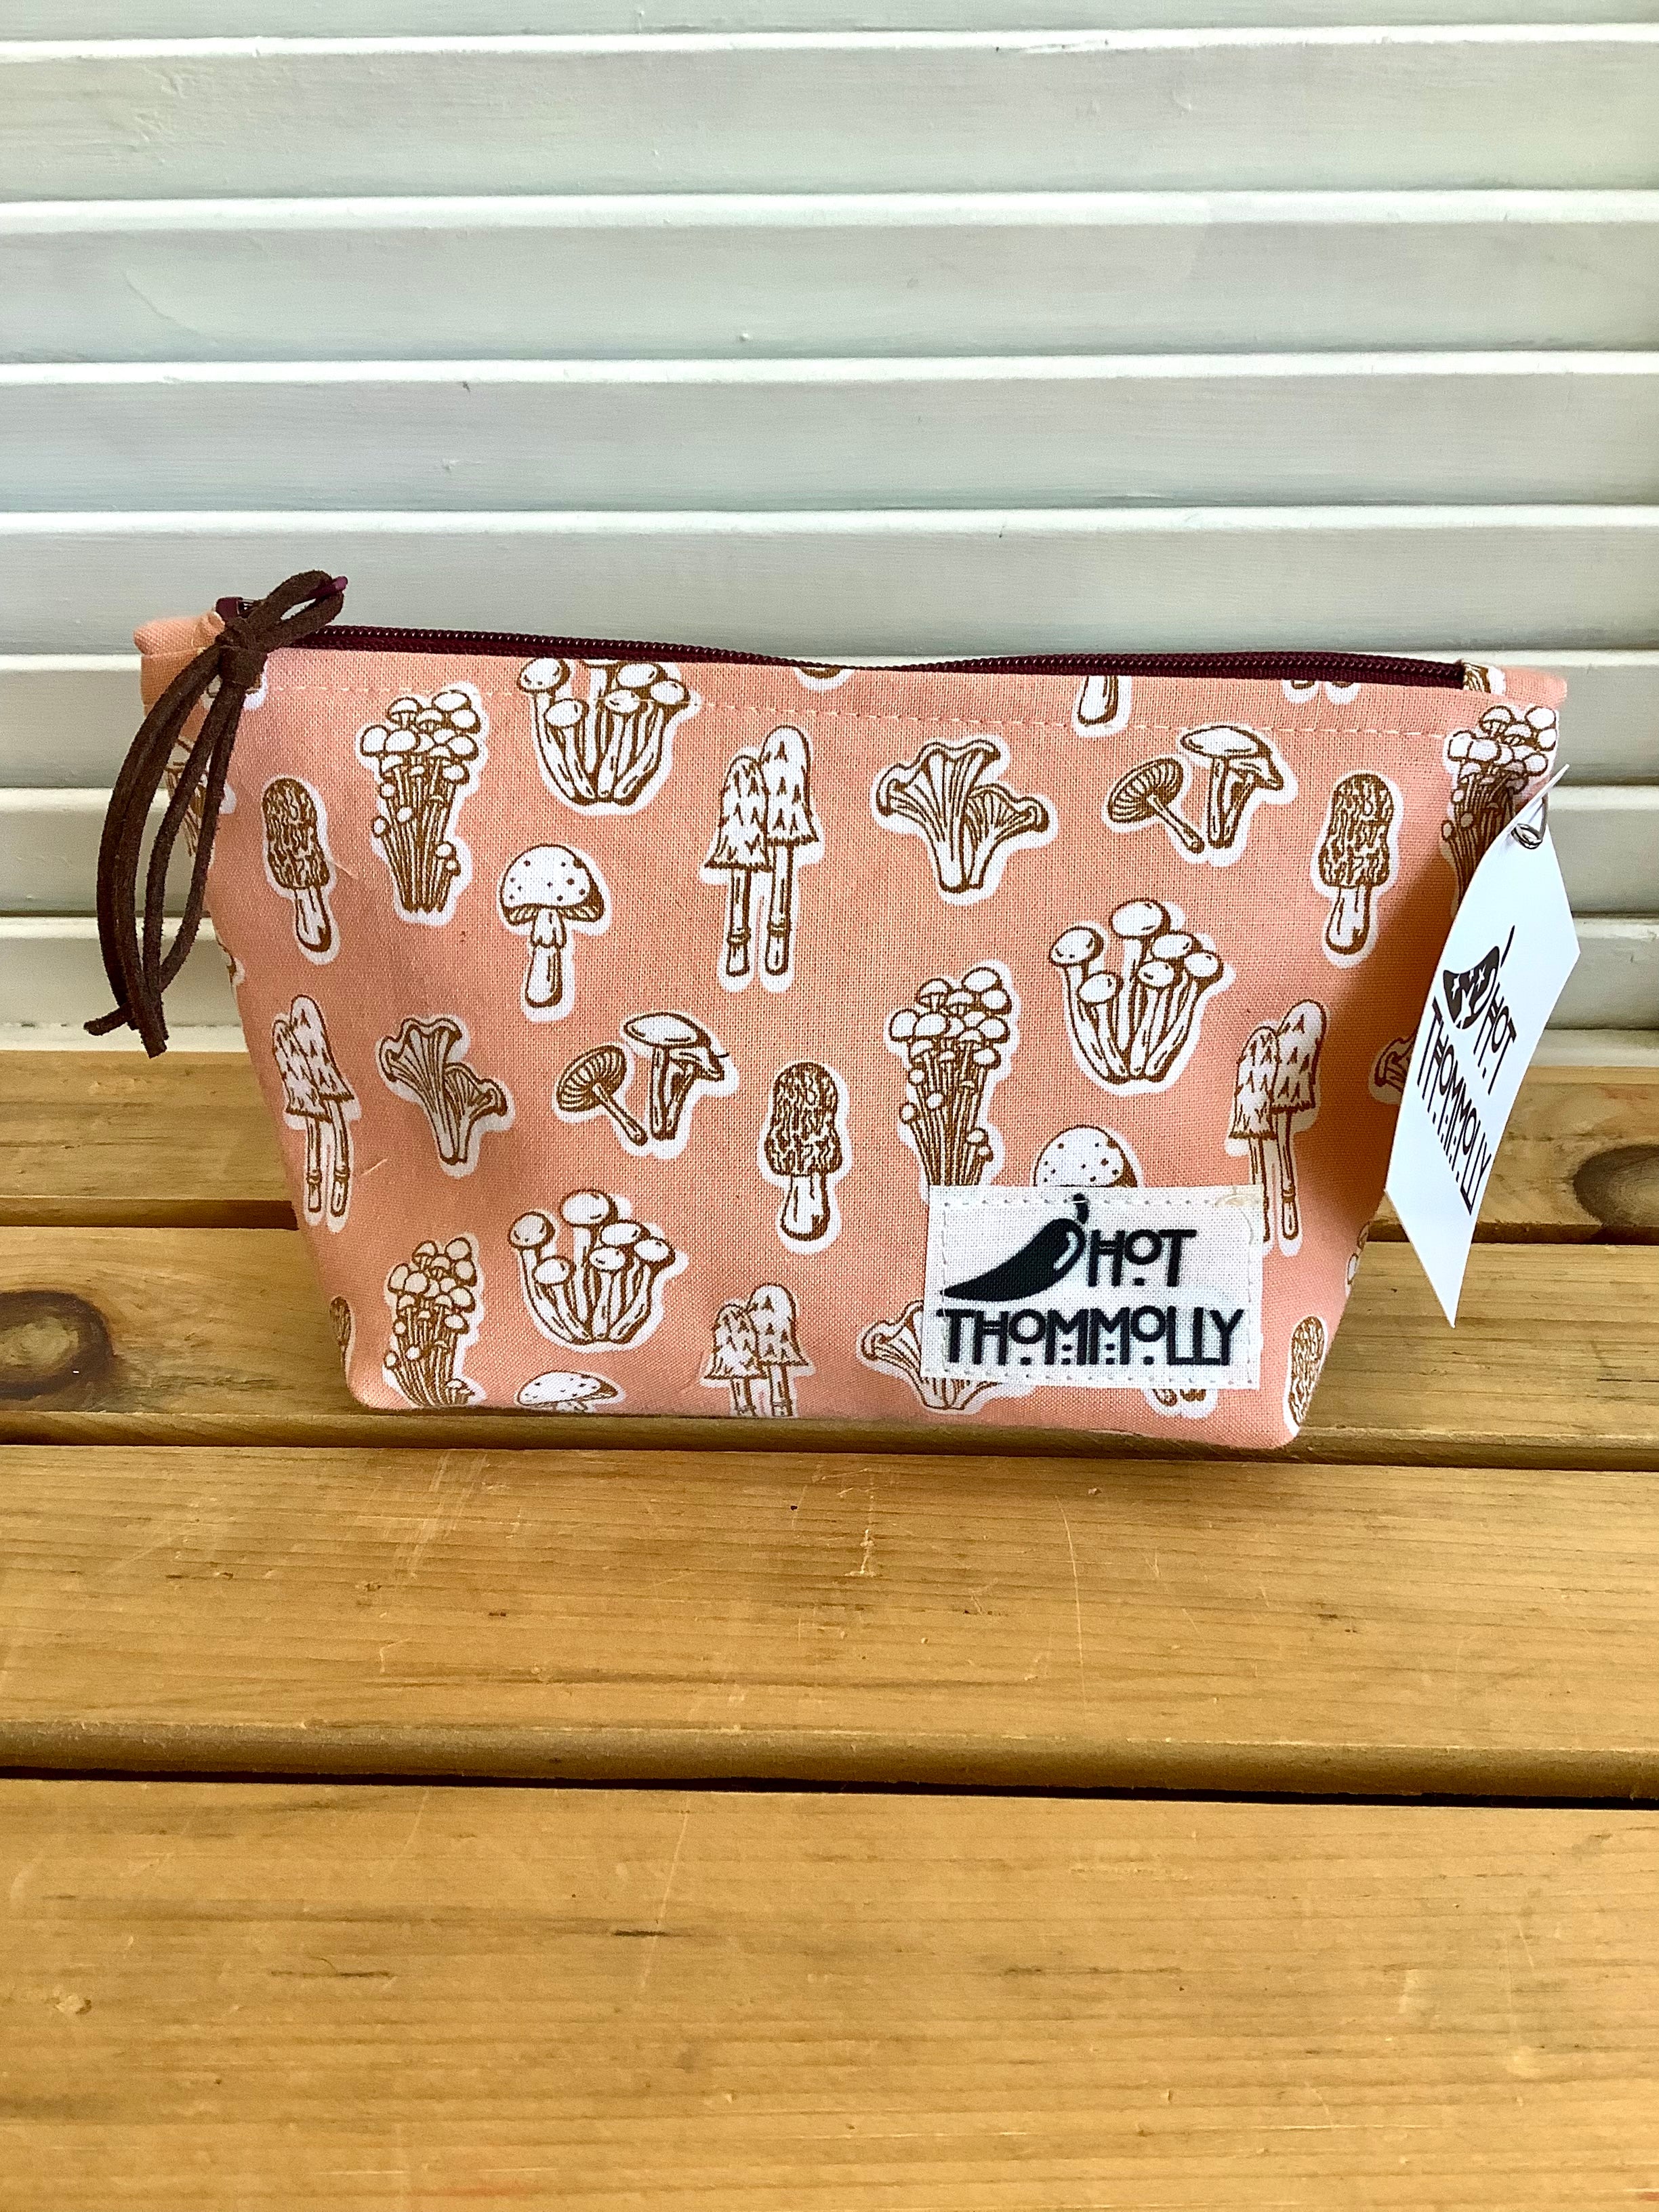 Zipper Pouch from Hot Thommolly